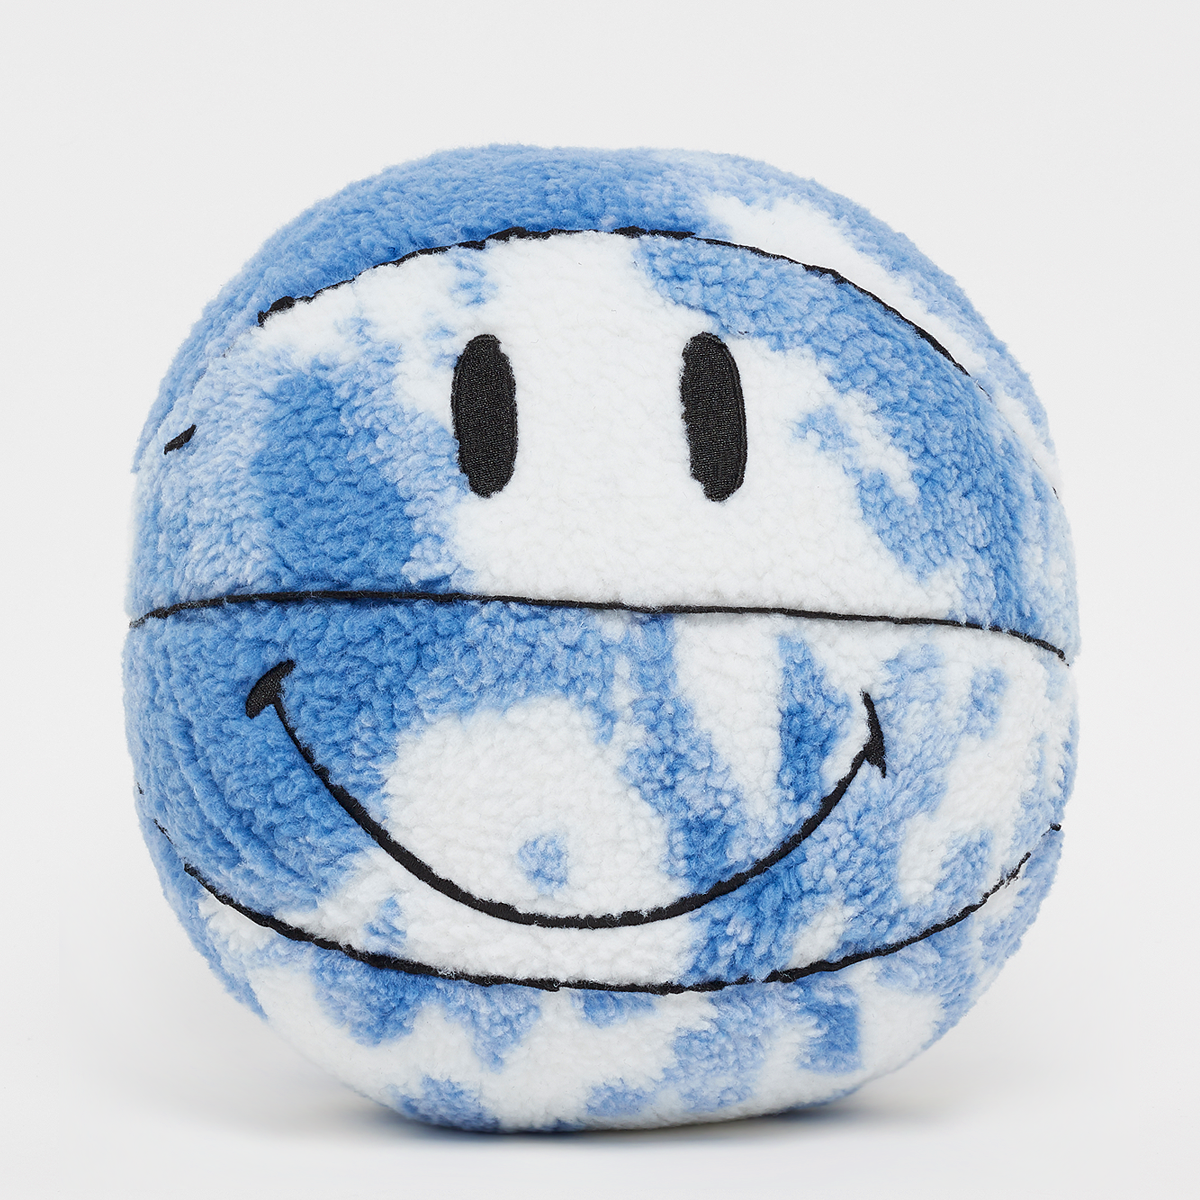 Smiley Market In The Clouds Plush Basketball (Size 7)